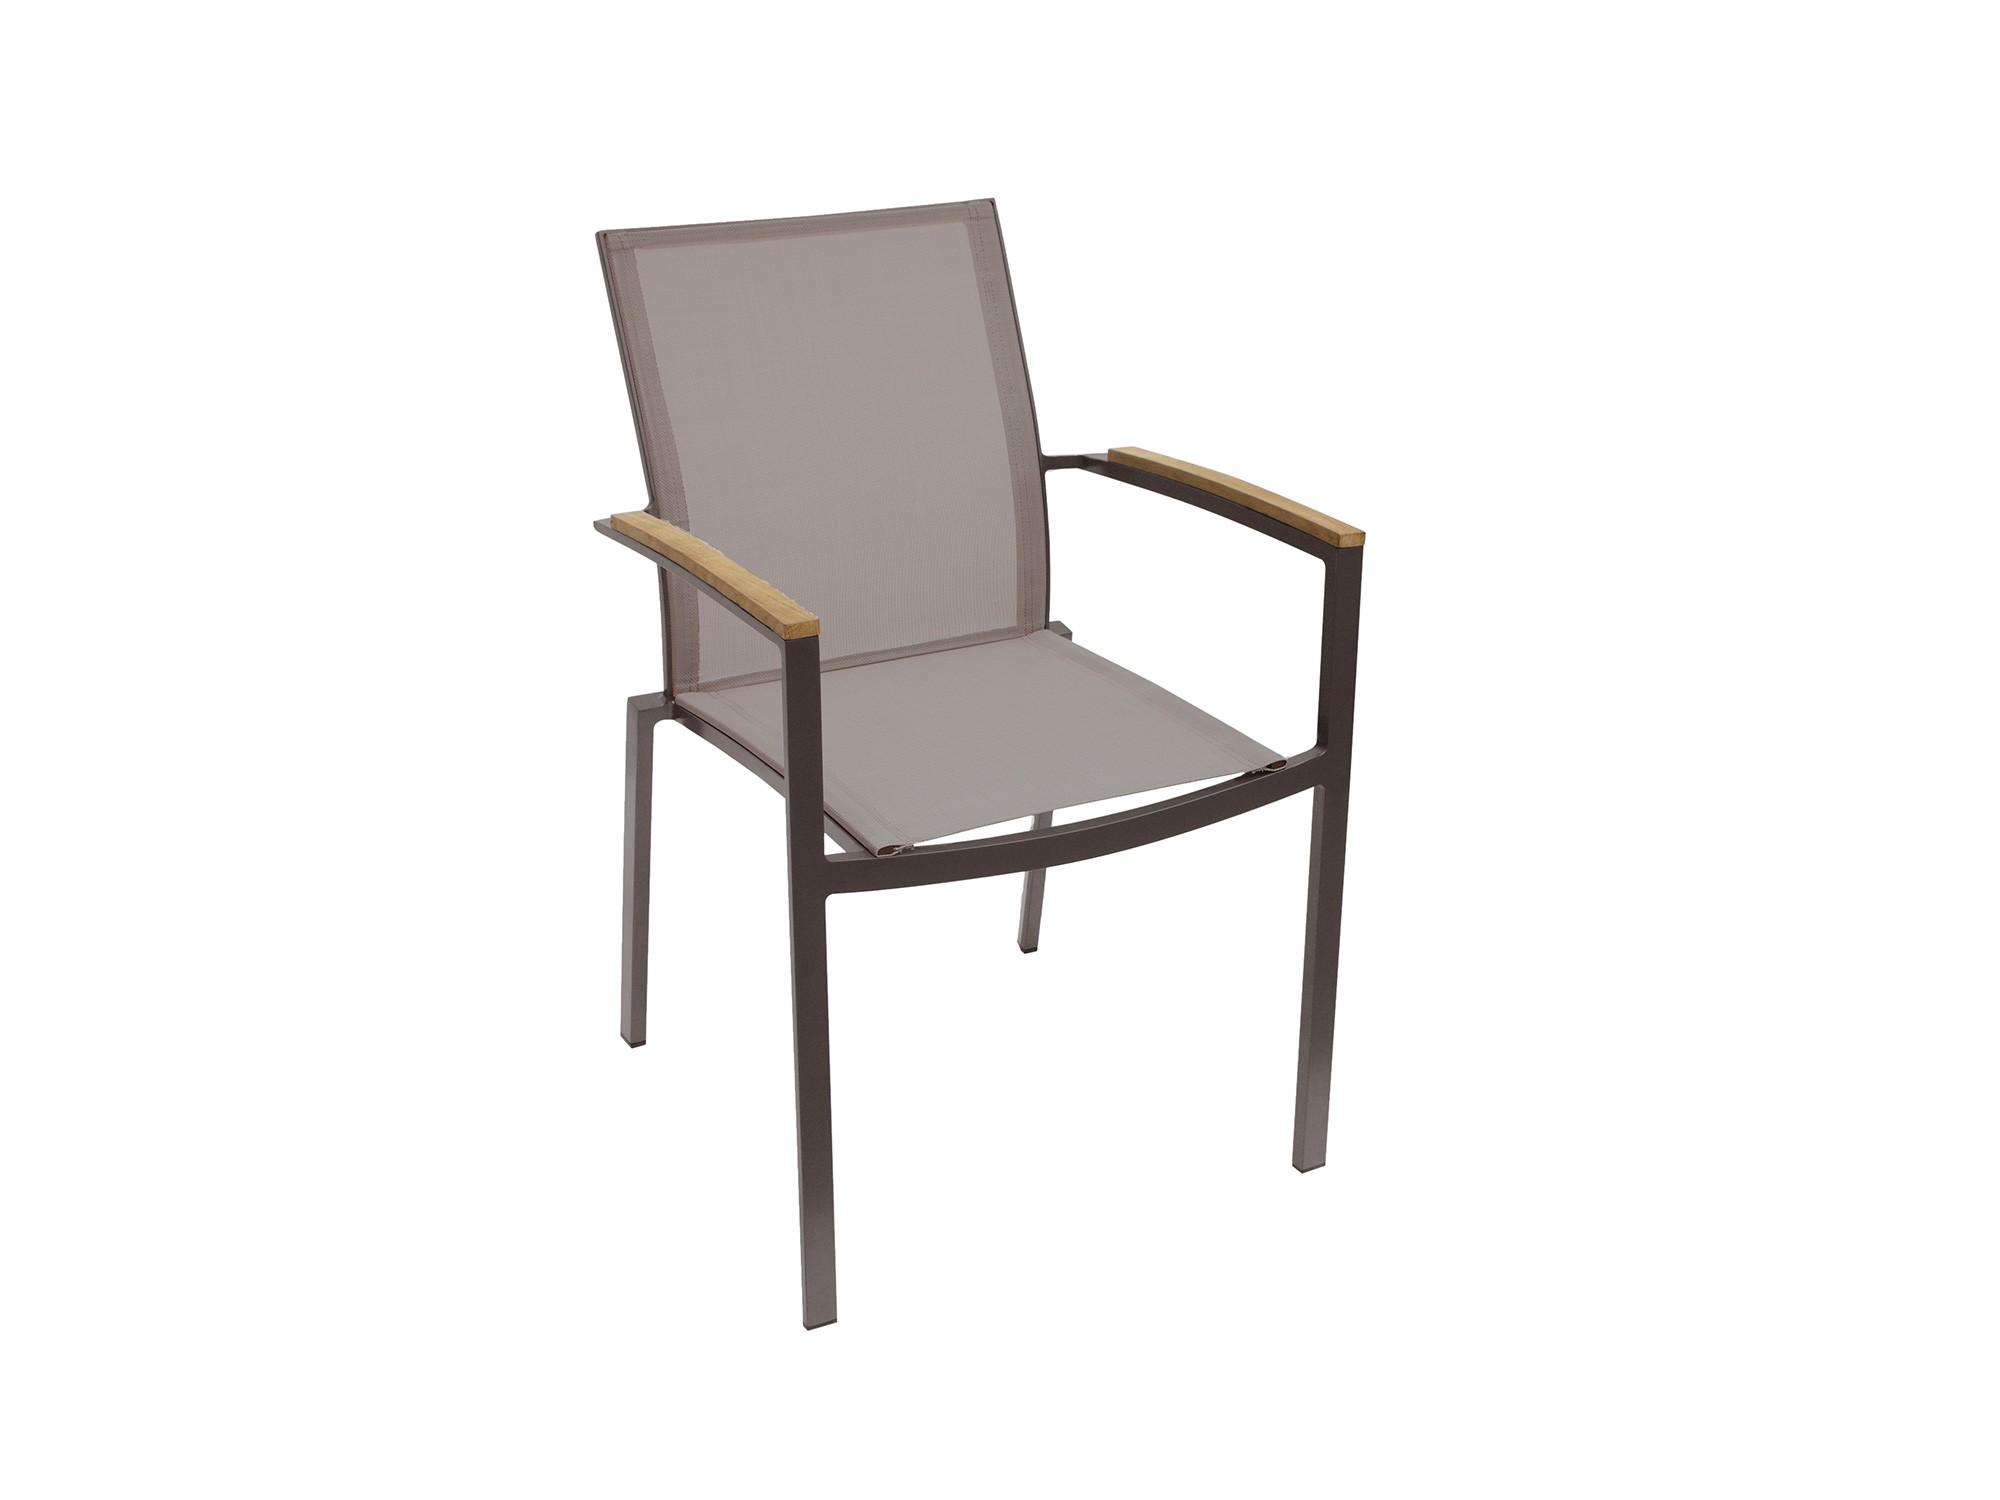 Contemporary Outdoor Armchair Sanctuary ODAC1540-TAU-Set-4 in Natural, Taupe, Gray 